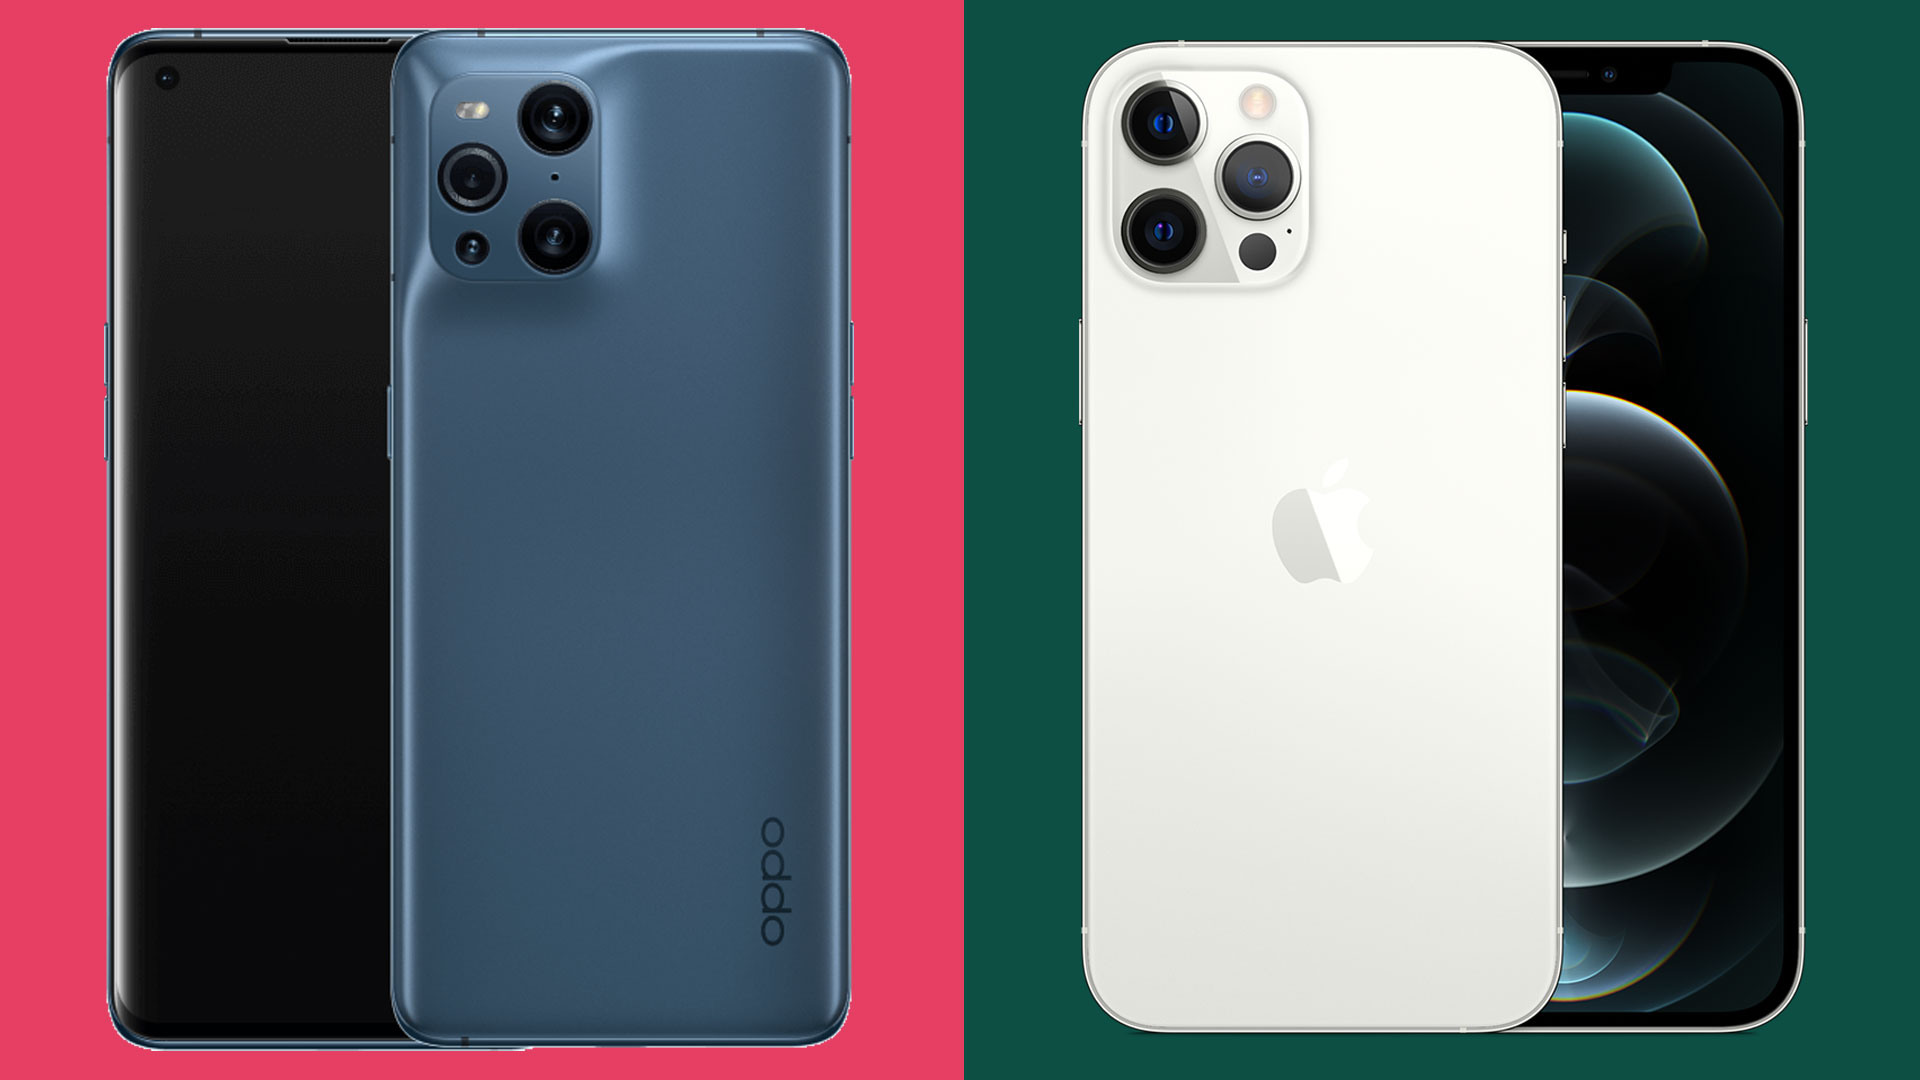 Oppo Find X3 Pro vs iPhone 12 Pro Max supersized camera phones face